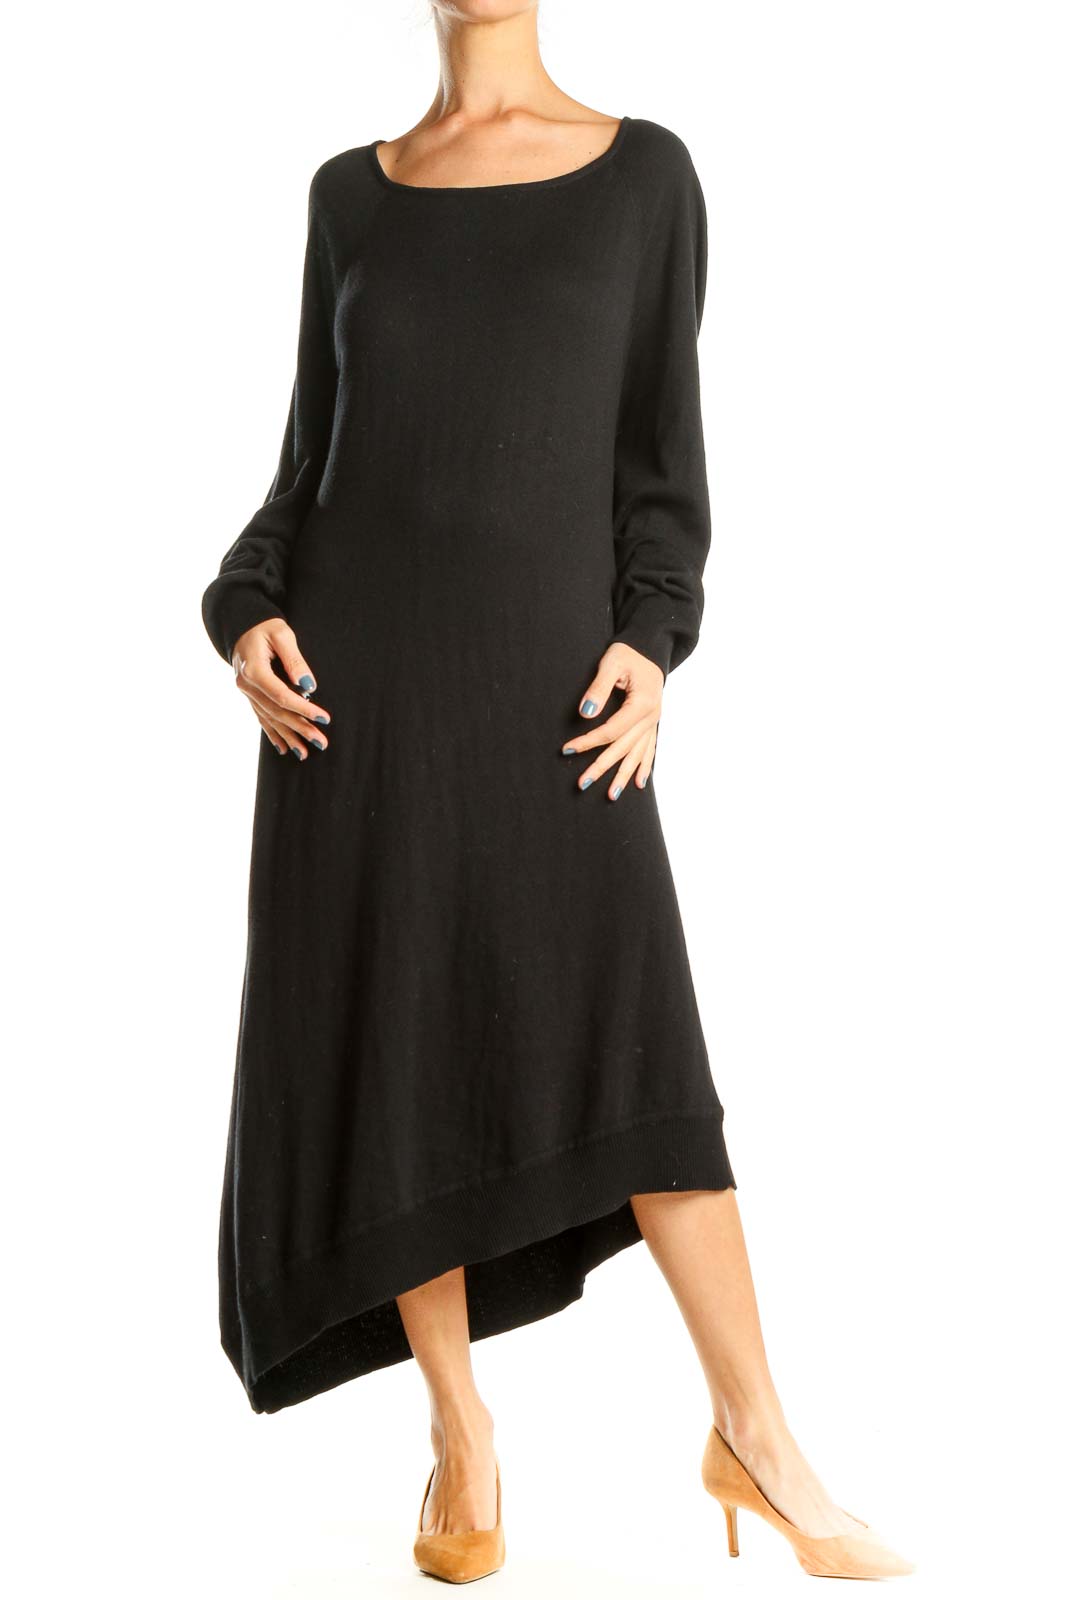 Black Classic Long Sleeve A-Line Dress Front